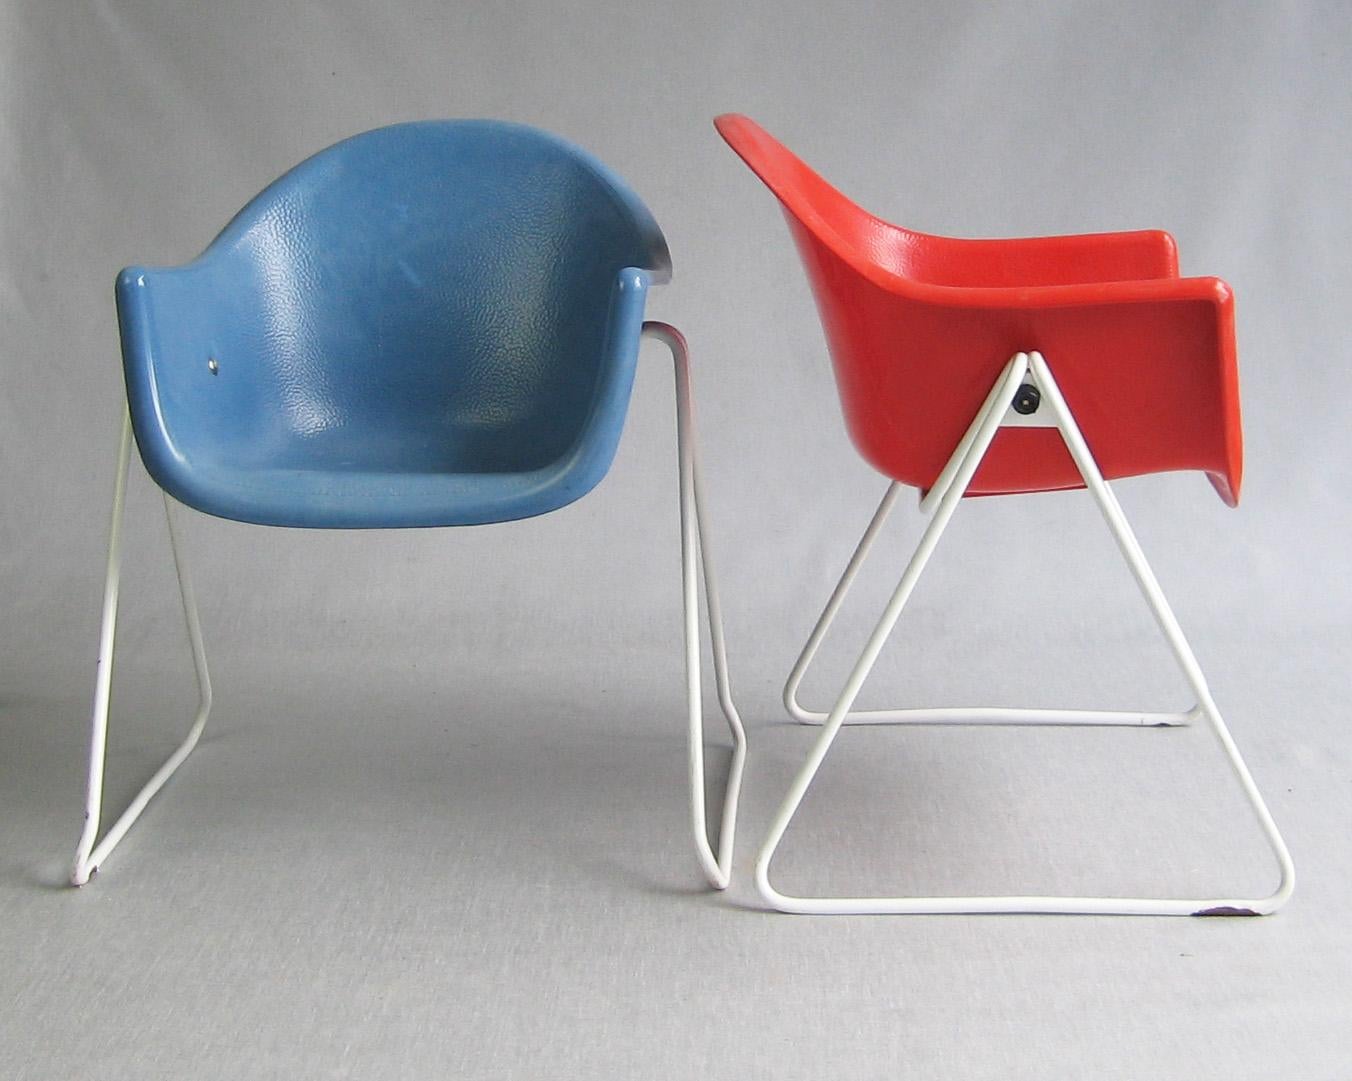 Pair of Walter Papst kids chairs, Wilkhahn, Germany 1961 - 1968 For Sale 1